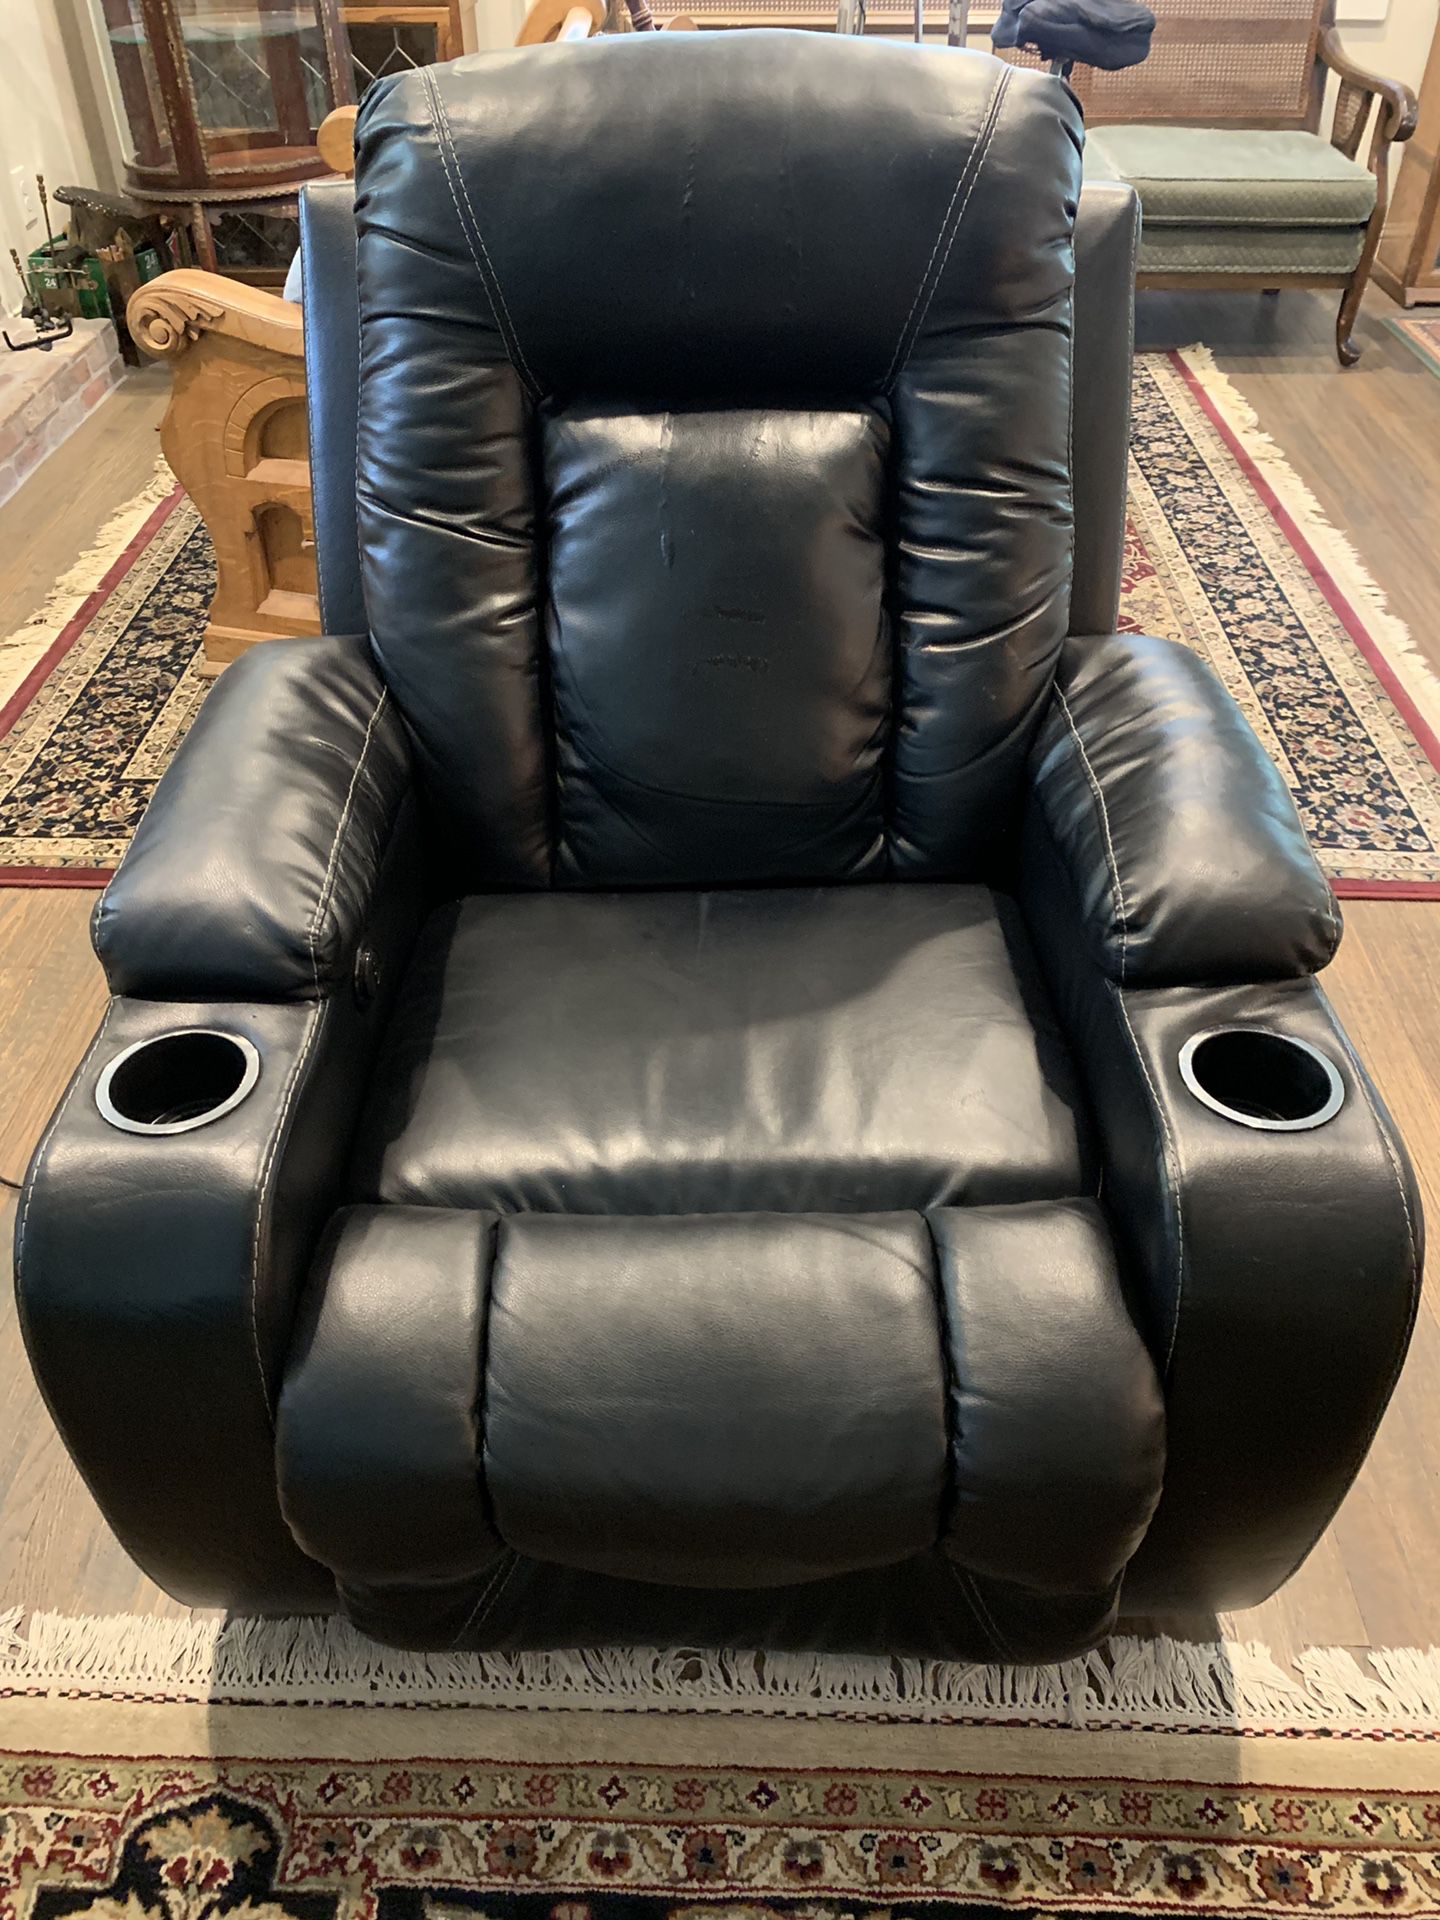 Ashley furniture electric leather recliner